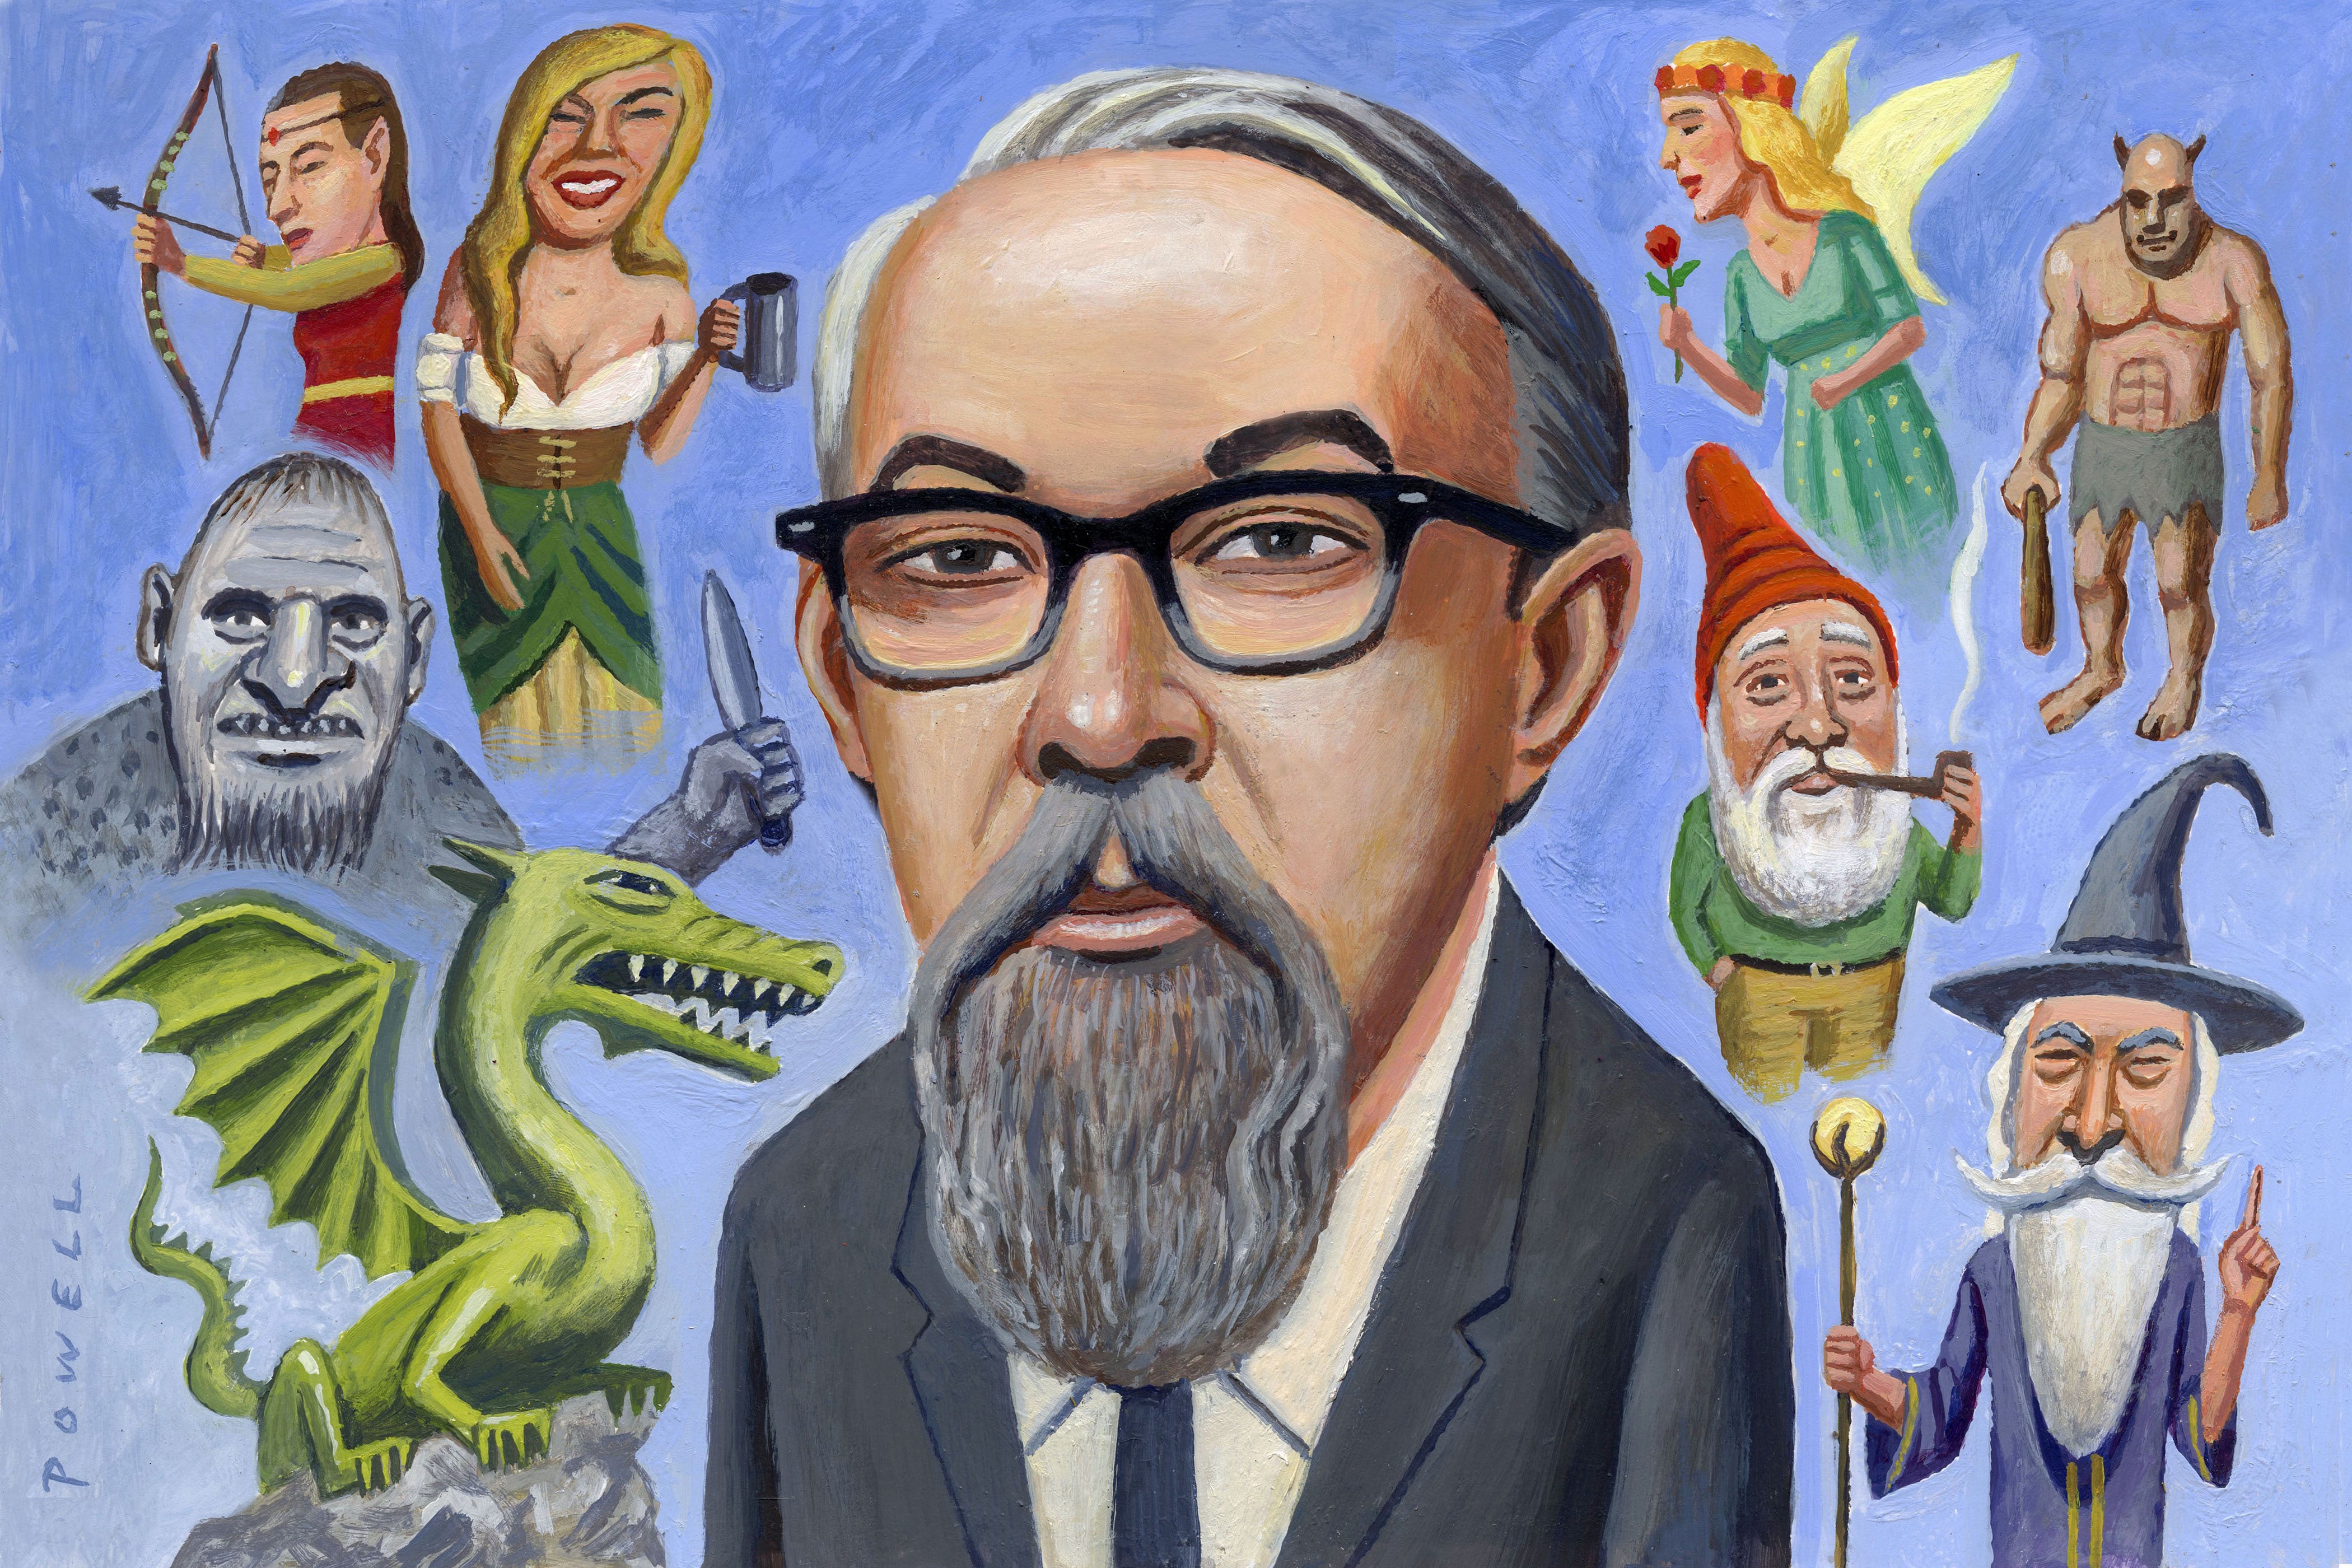 An illustration of Lester del Rey surrounded by dragons, wizards, trolls, and other such fantastical creatures.